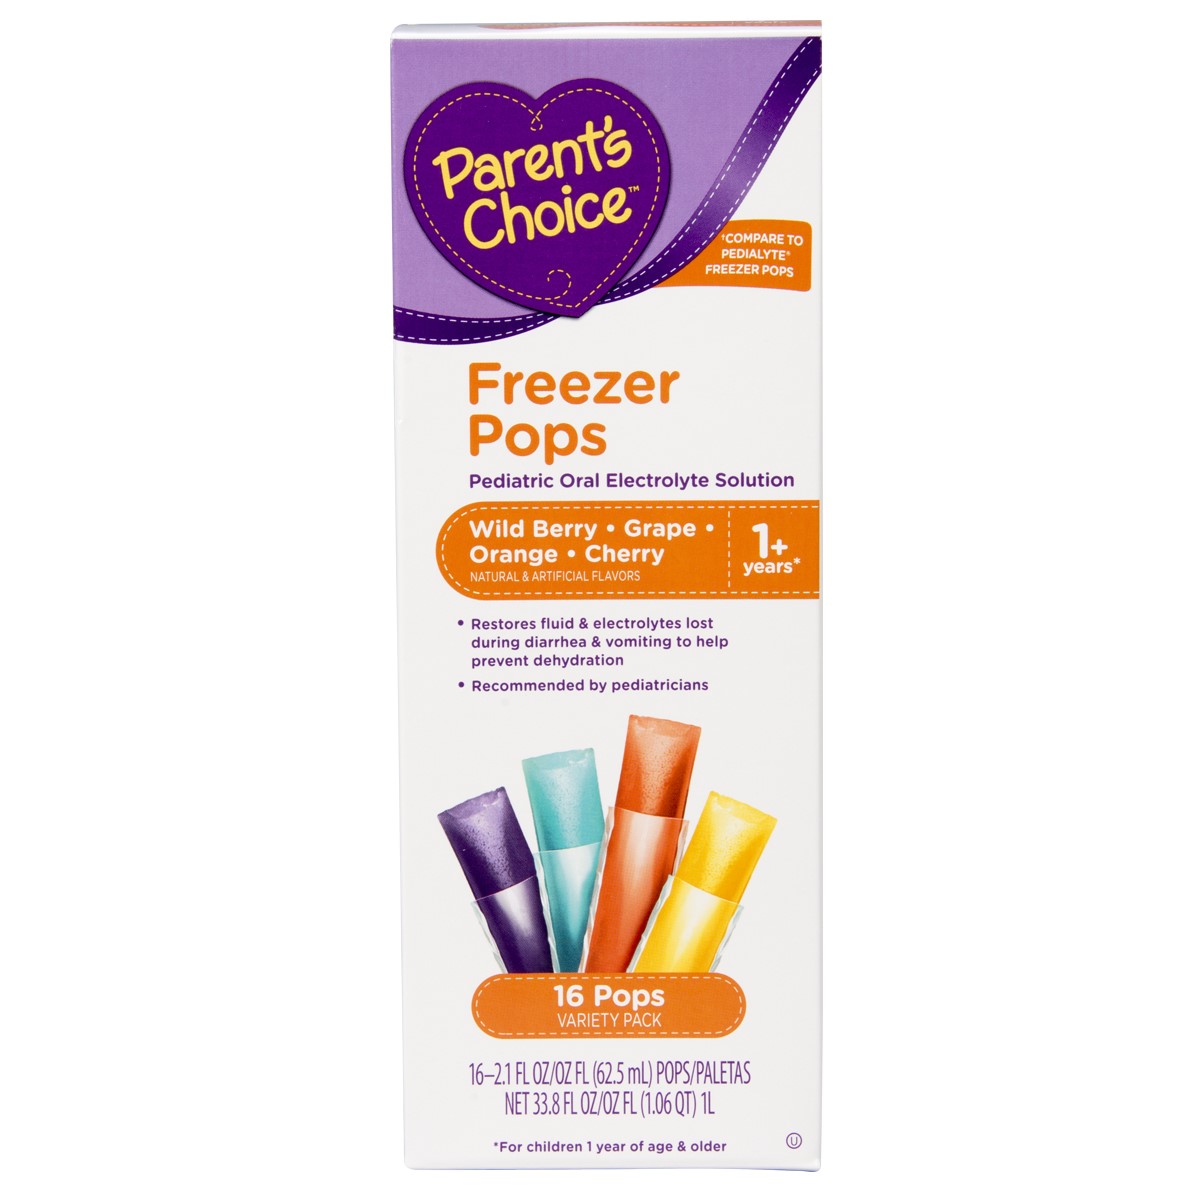 Parent's Choice Freezer Pops, 16 Count, Variety Pack - image 1 of 5